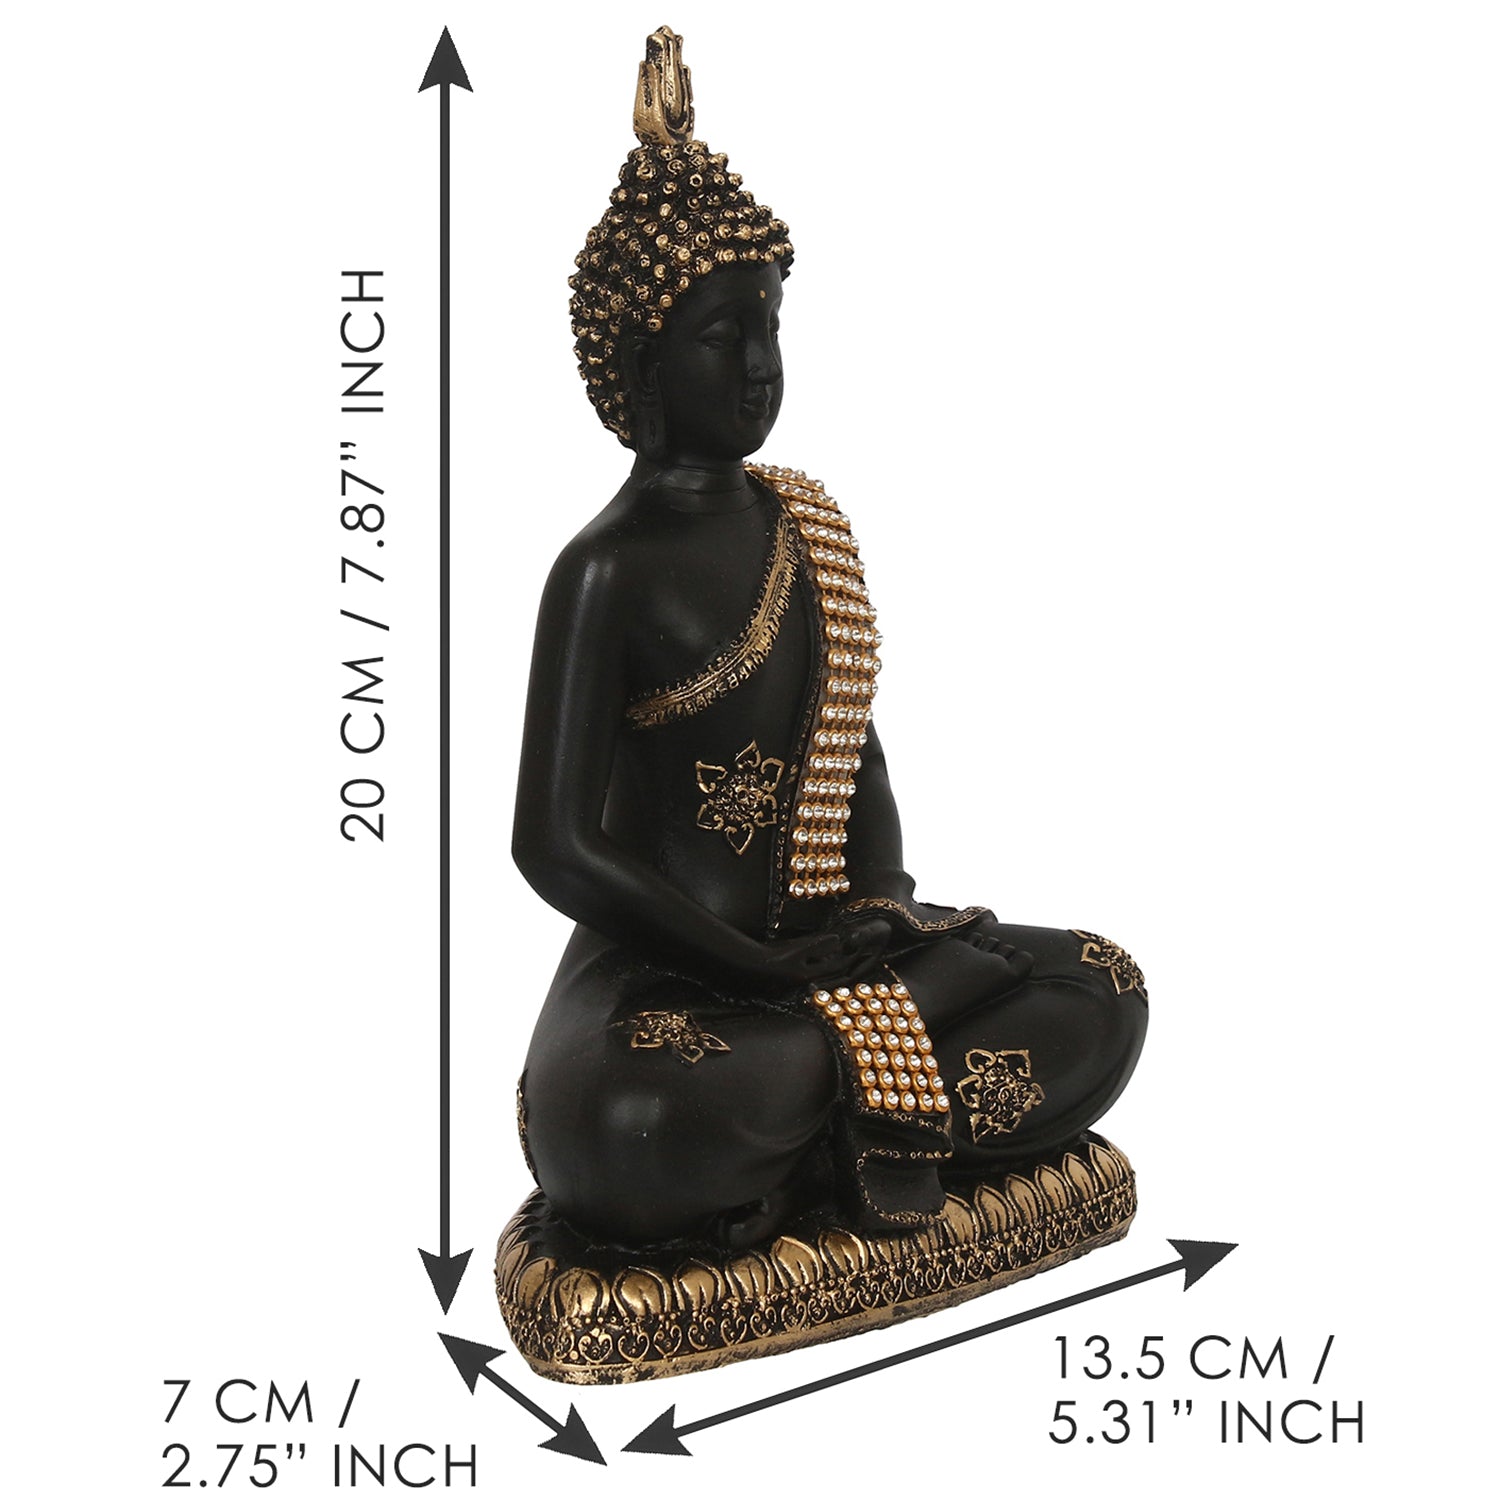 Polyresin Black and Golden Handcrafted Meditating Buddha Statue 3